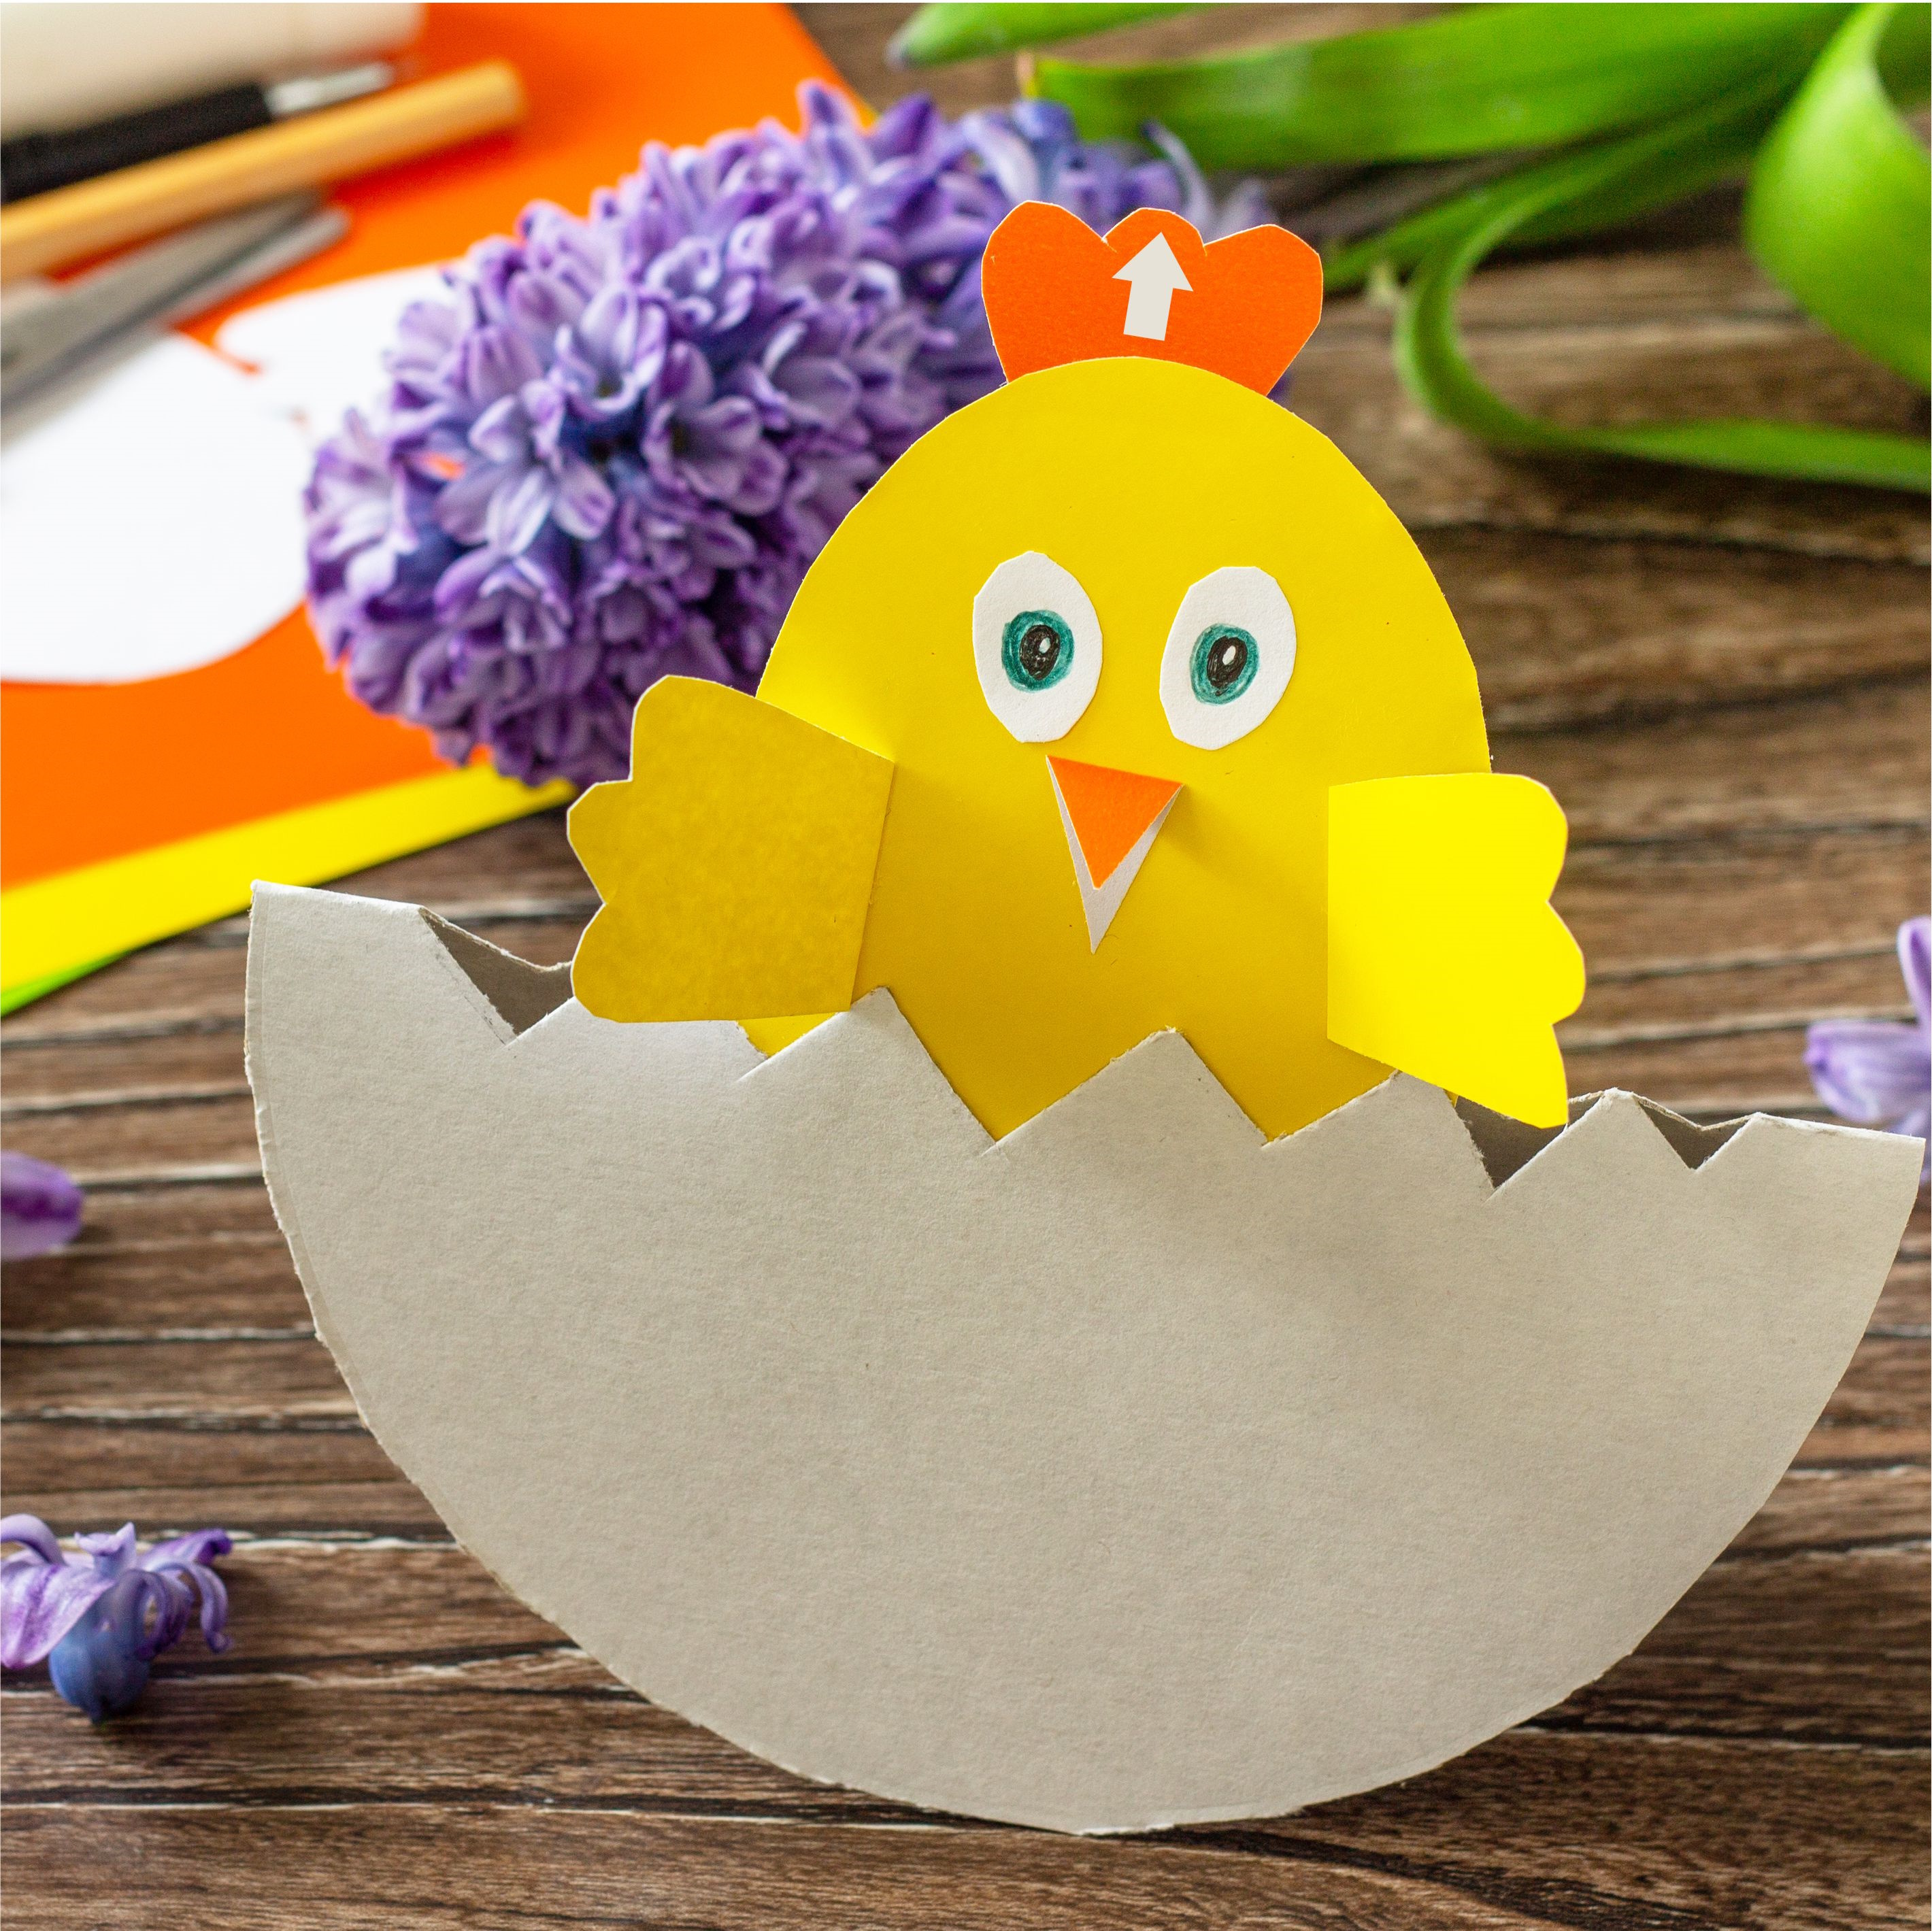 Chick Pop Up Card for kids to make for Easter